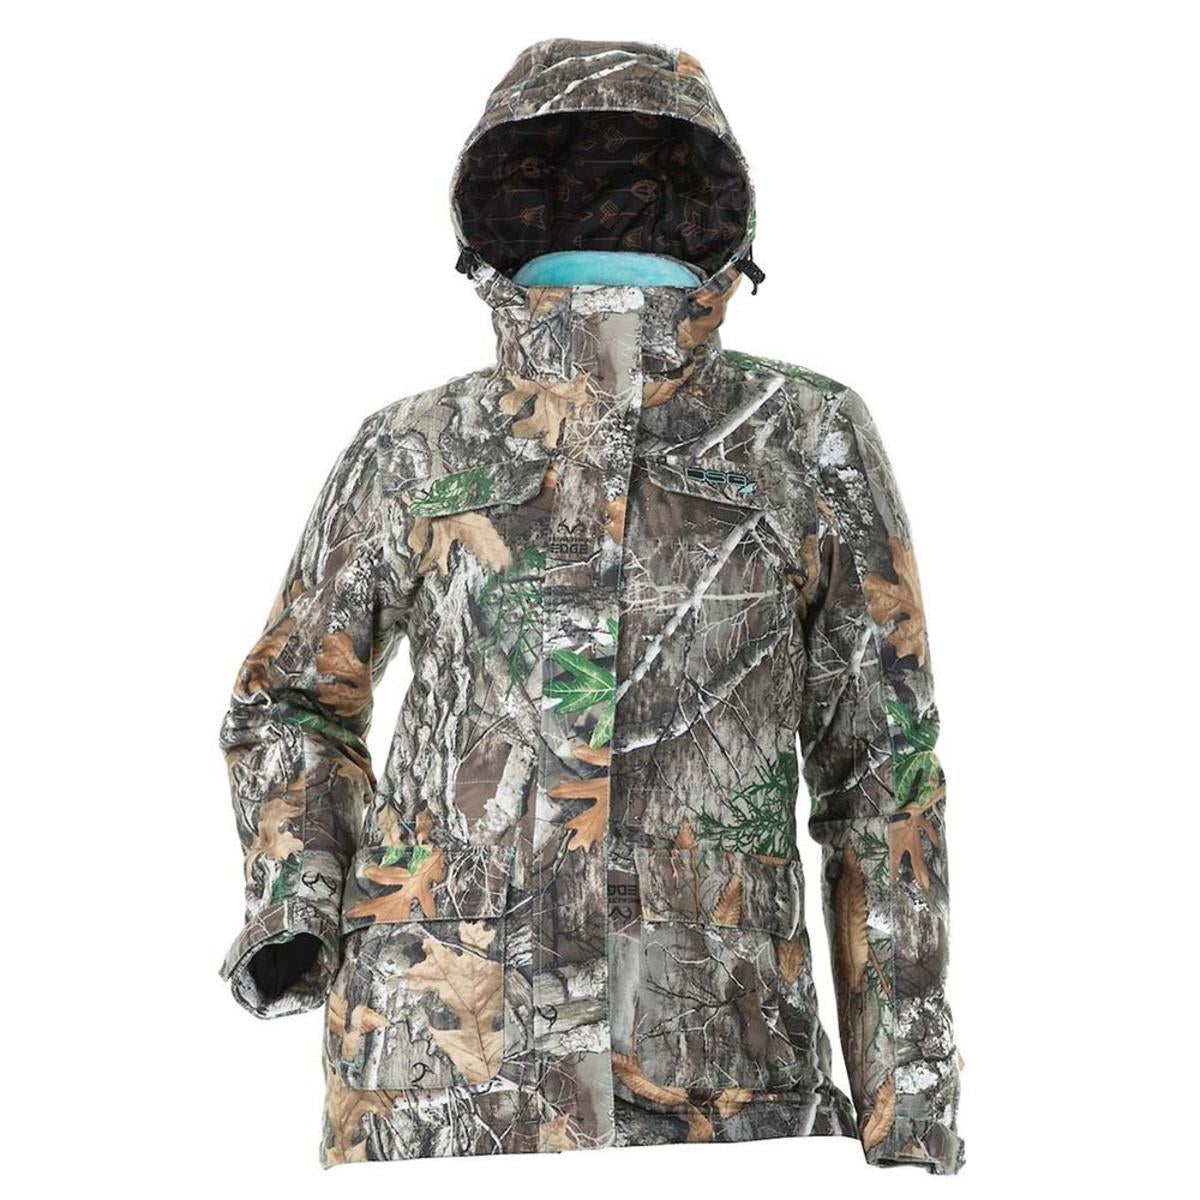 DSG Kylie 3.0 3-in-1 Hunting Jacket with Removable Fleece Liner - Realtree Edge